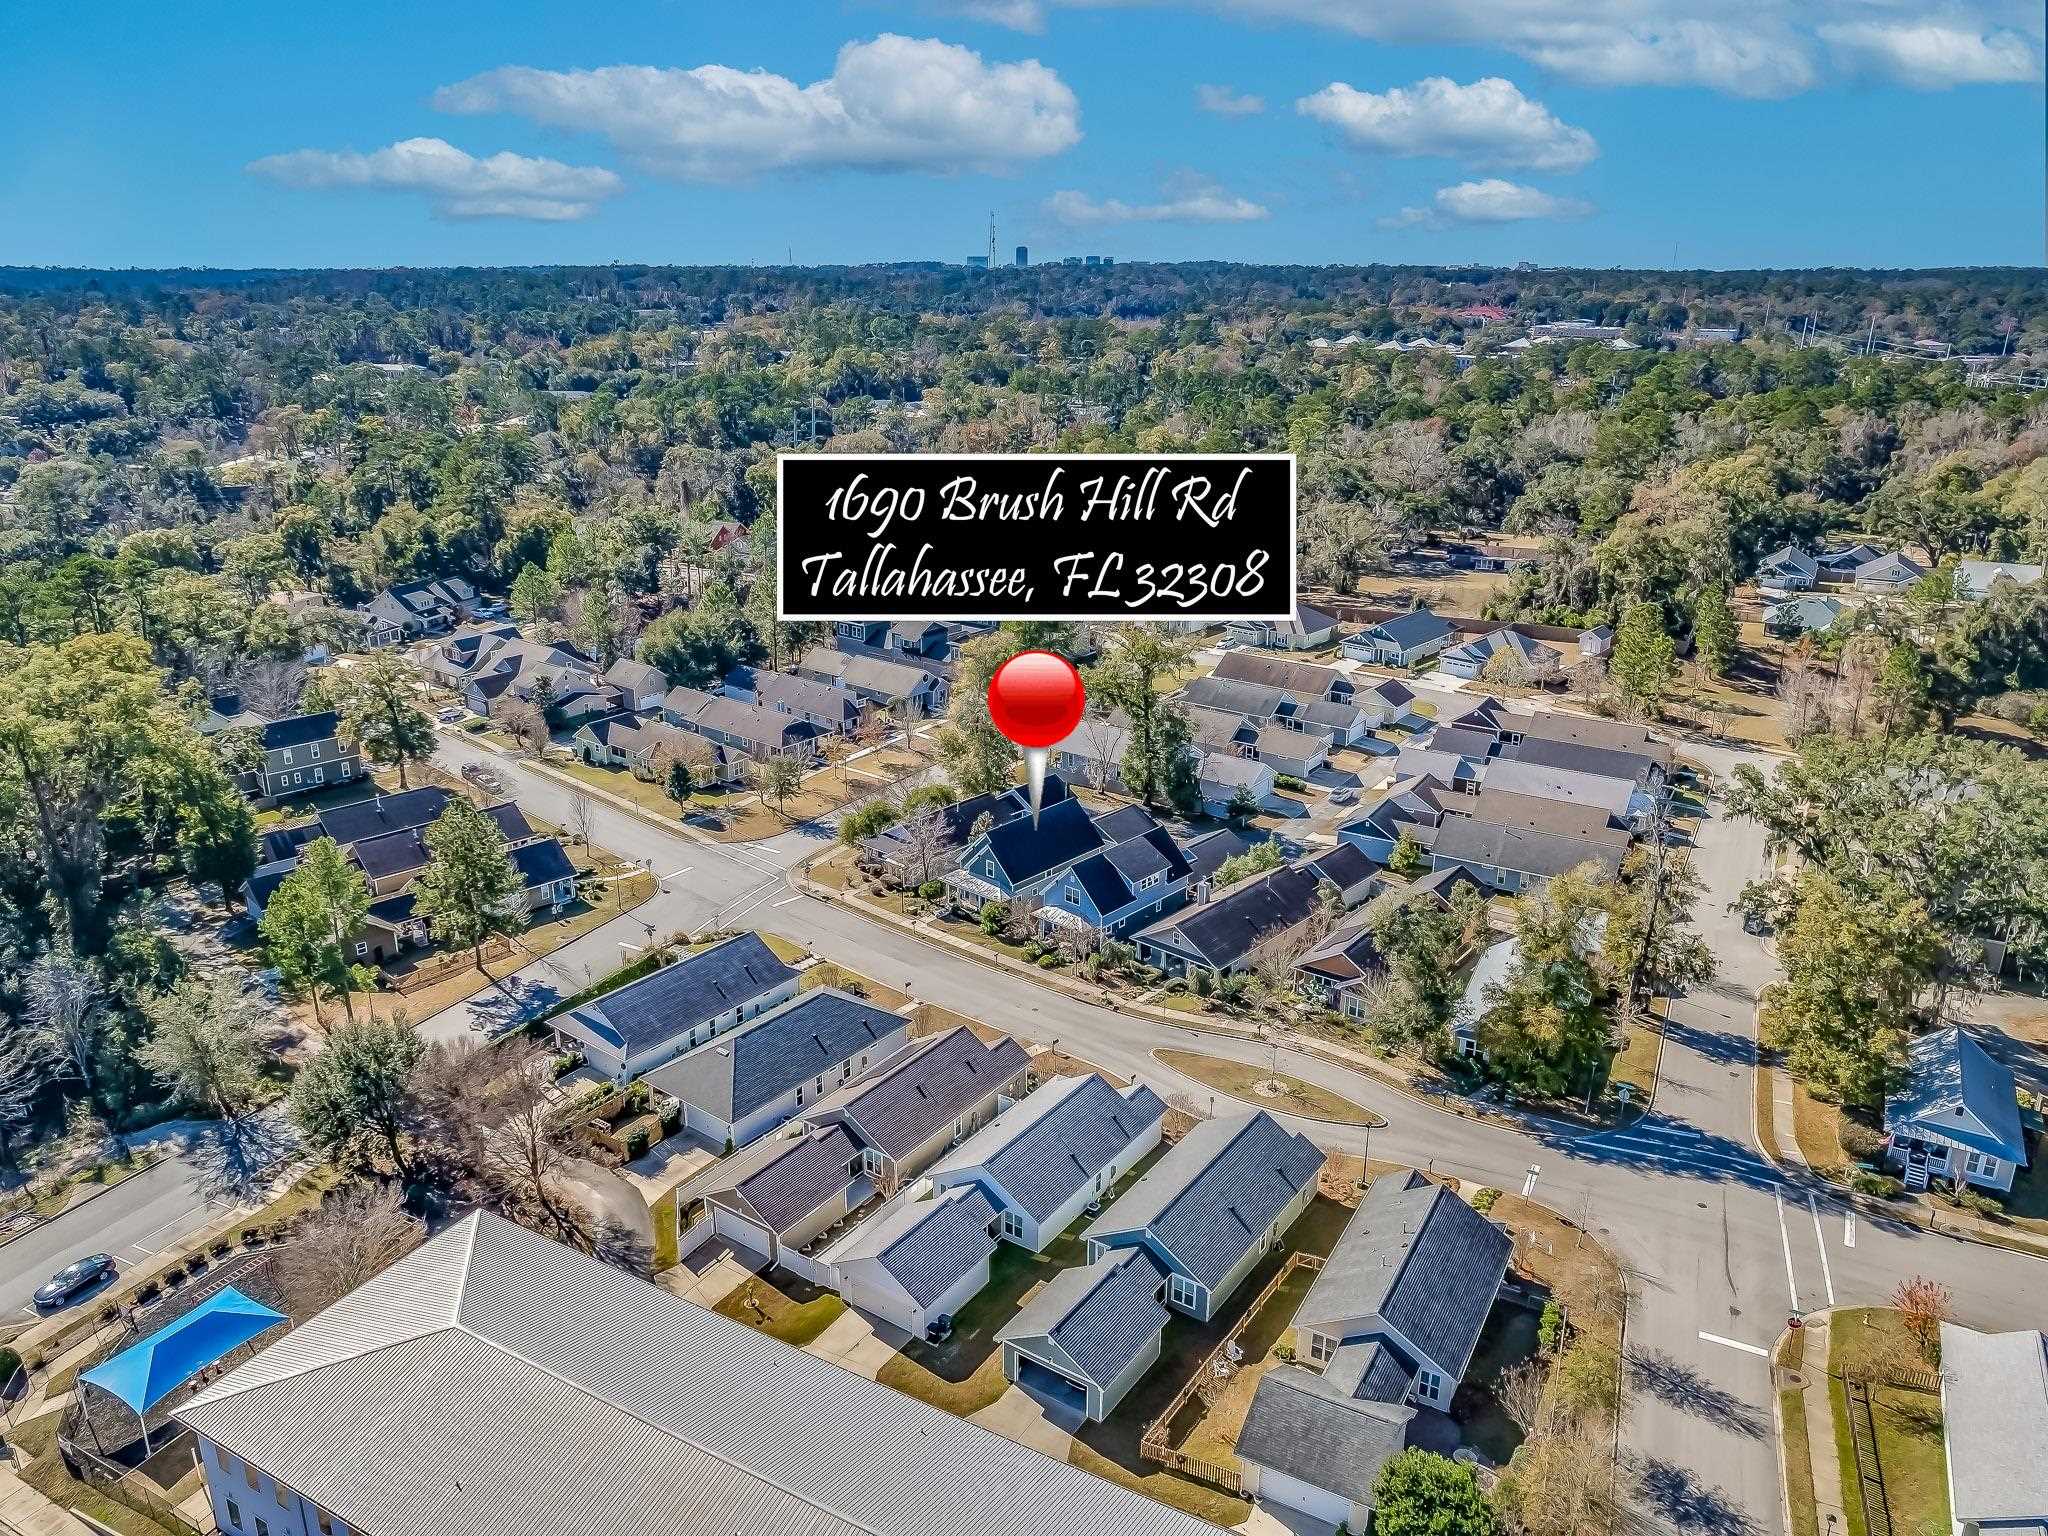 1690 Brush Hill Road,TALLAHASSEE,Florida 32308,3 Bedrooms Bedrooms,2 BathroomsBathrooms,Detached single family,1690 Brush Hill Road,367083